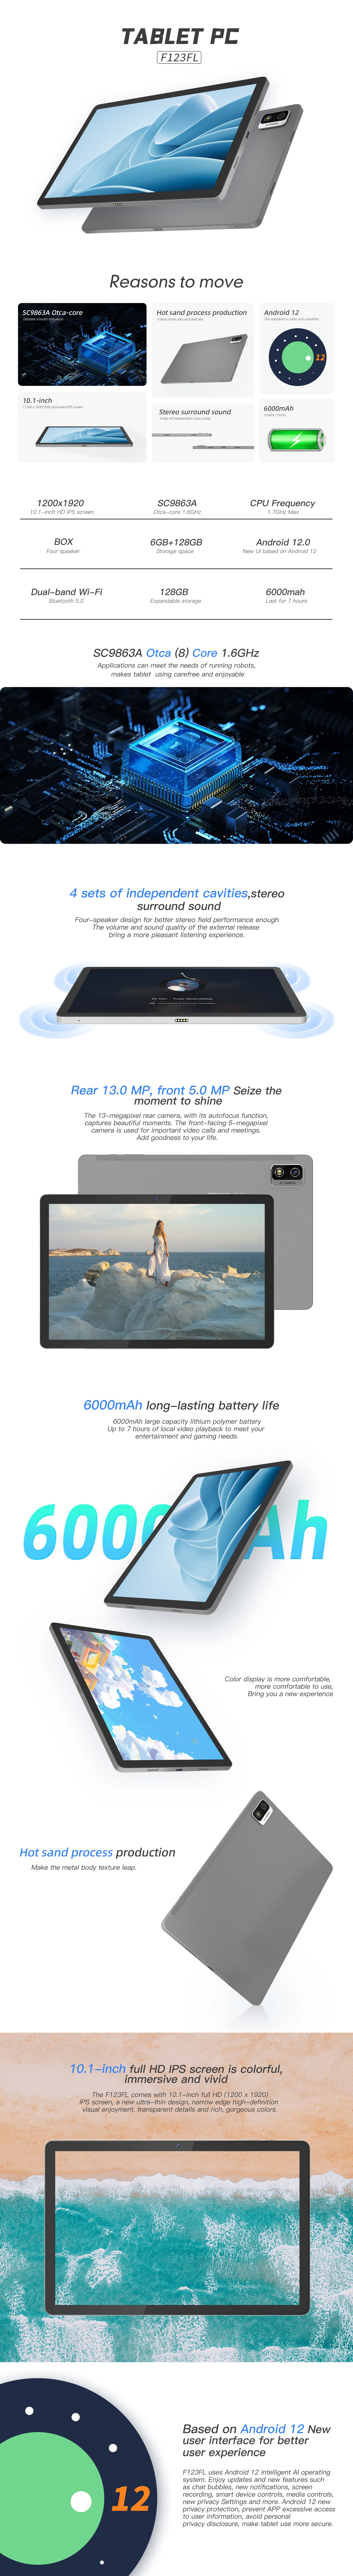 Innovative tablet features for creatives